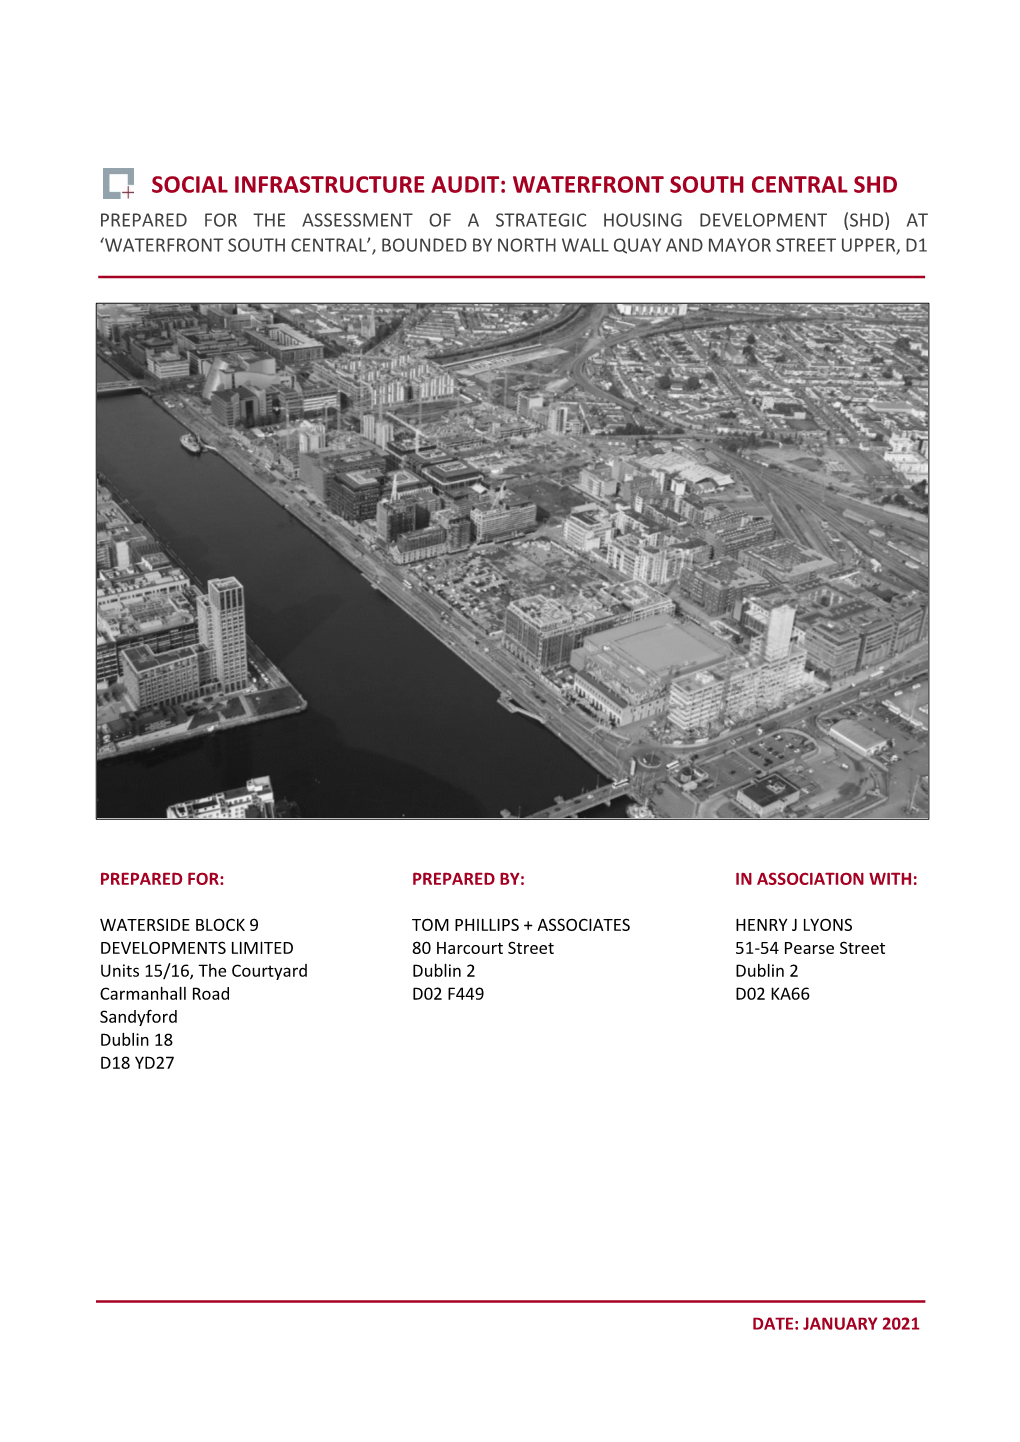 Social Infrastructure Audit: Waterfront South Central